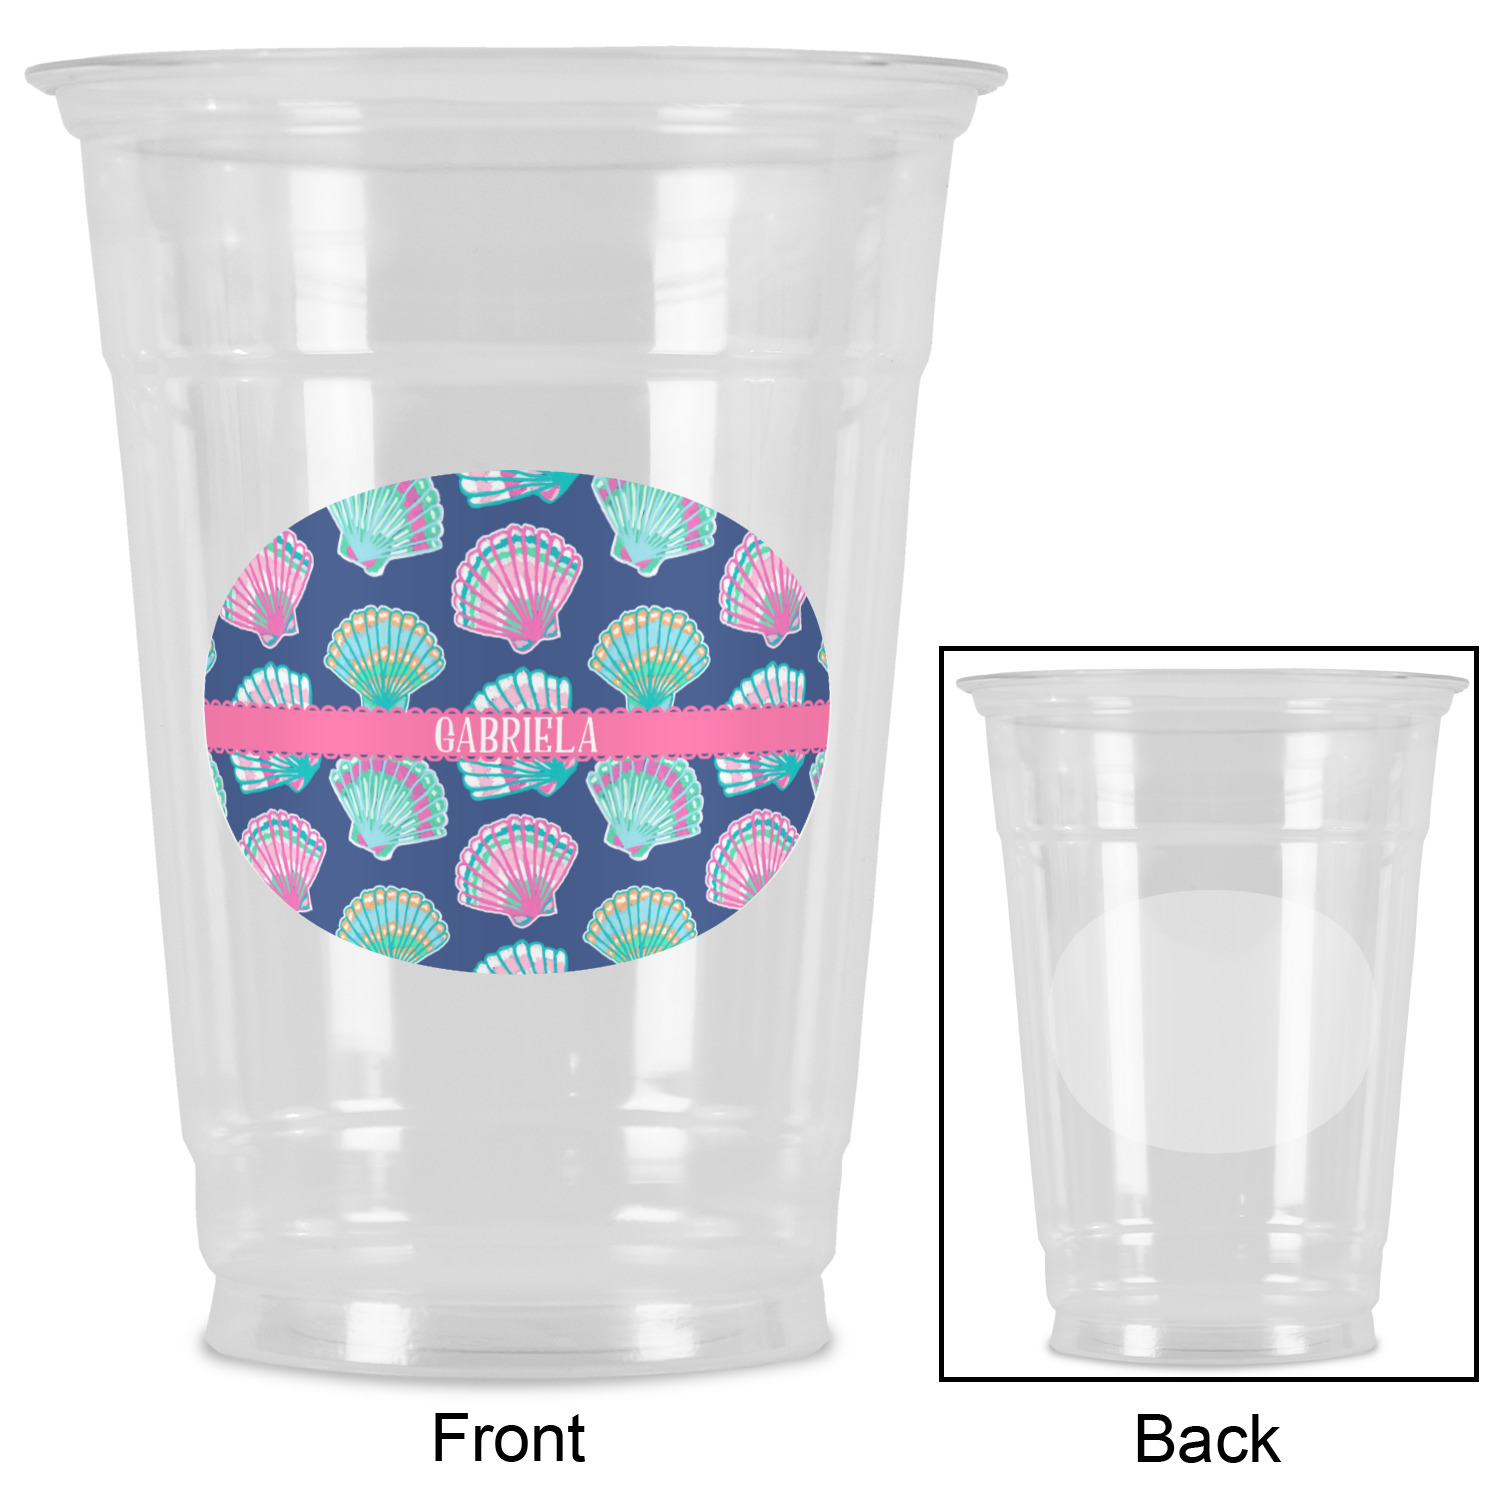 https://www.youcustomizeit.com/common/MAKE/1108490/Preppy-Sea-Shells-Party-Cups-16oz-Approval.jpg?lm=1671150187